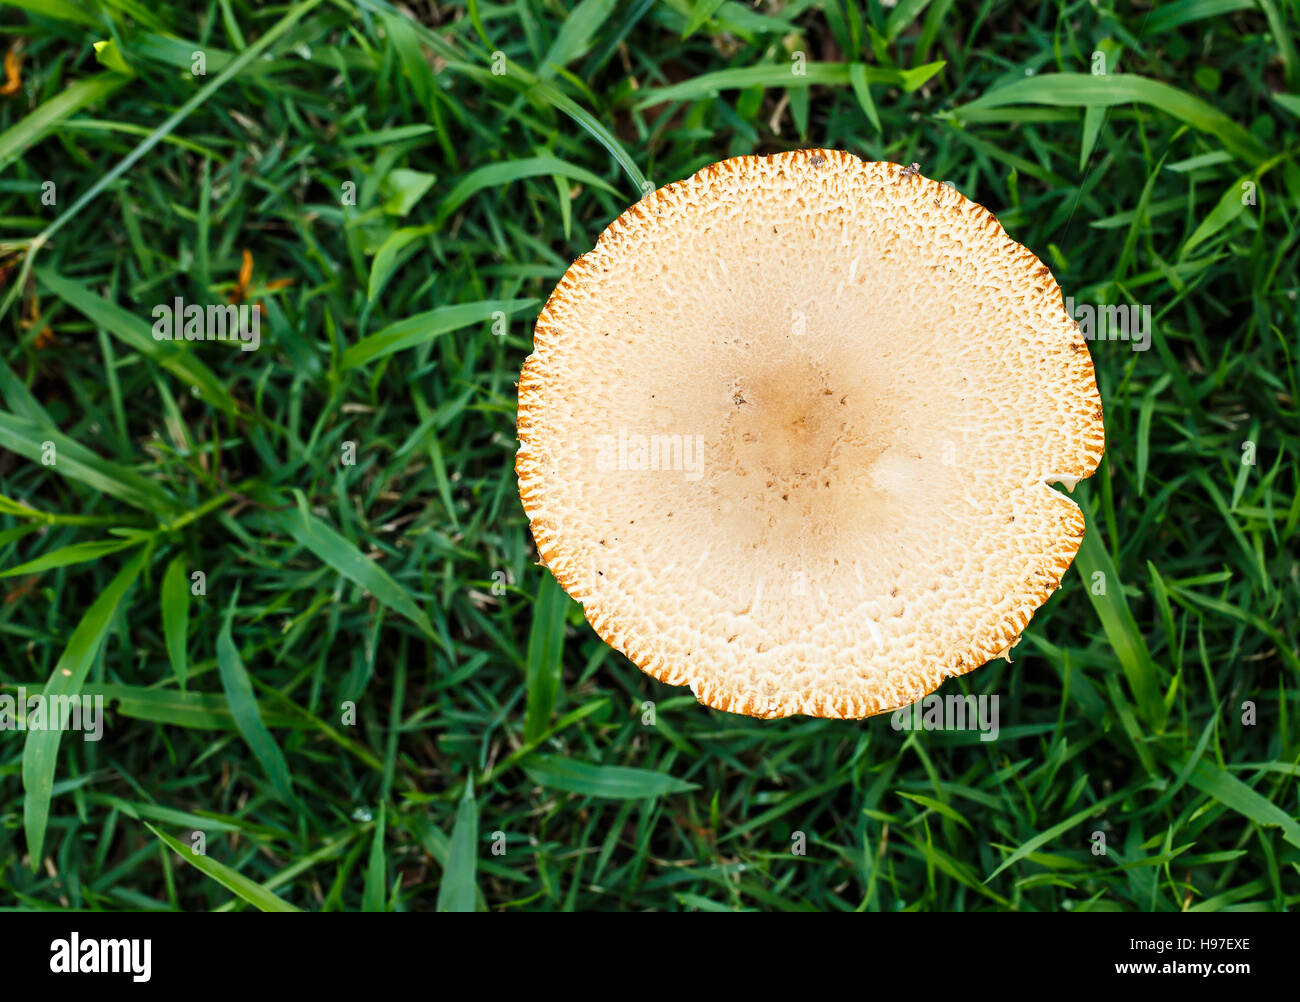 Mushroom in the tropical forests. Stock Photo